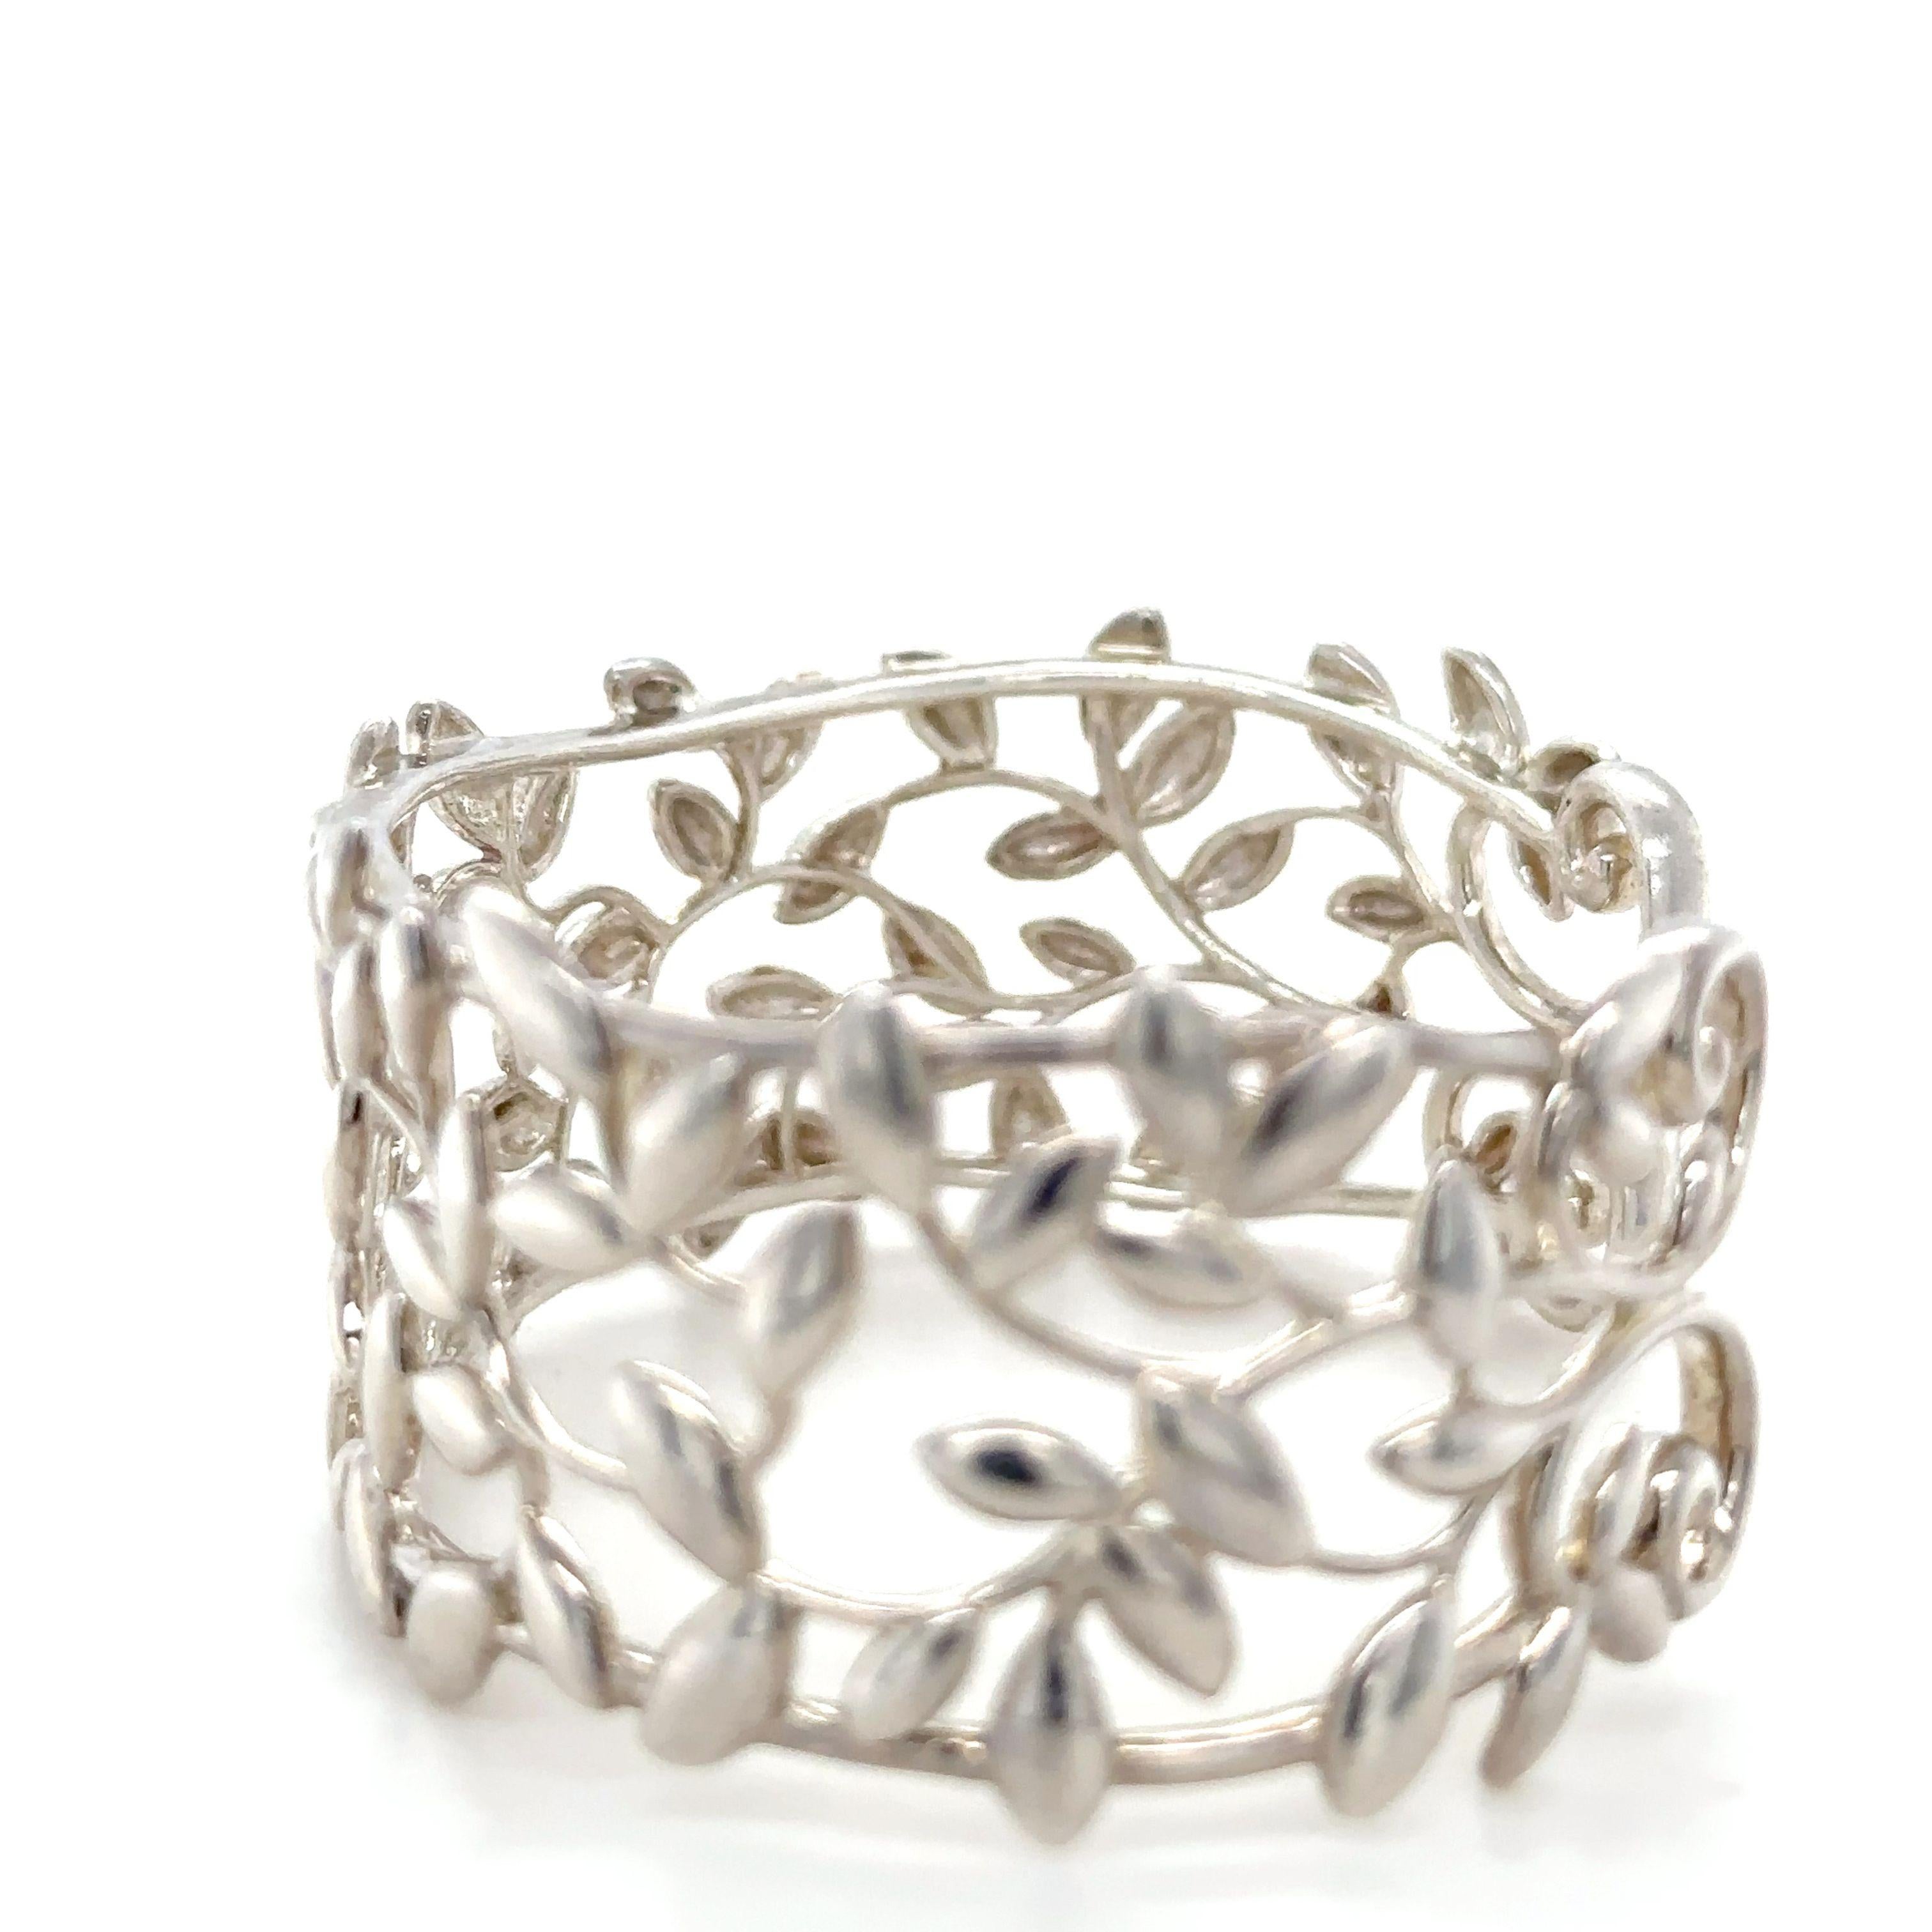  A Tiffany & Co Paloma Picasso Olive Leaf Narrow Cuff in Sterling Silver.

Inspired by the olive branch, a symbol of peace and abundance. Size Small. Original designs by Paloma Picasso

Metal: 925 Sterling Silver
Carat: N/A
Colour: N/A
Clarity: